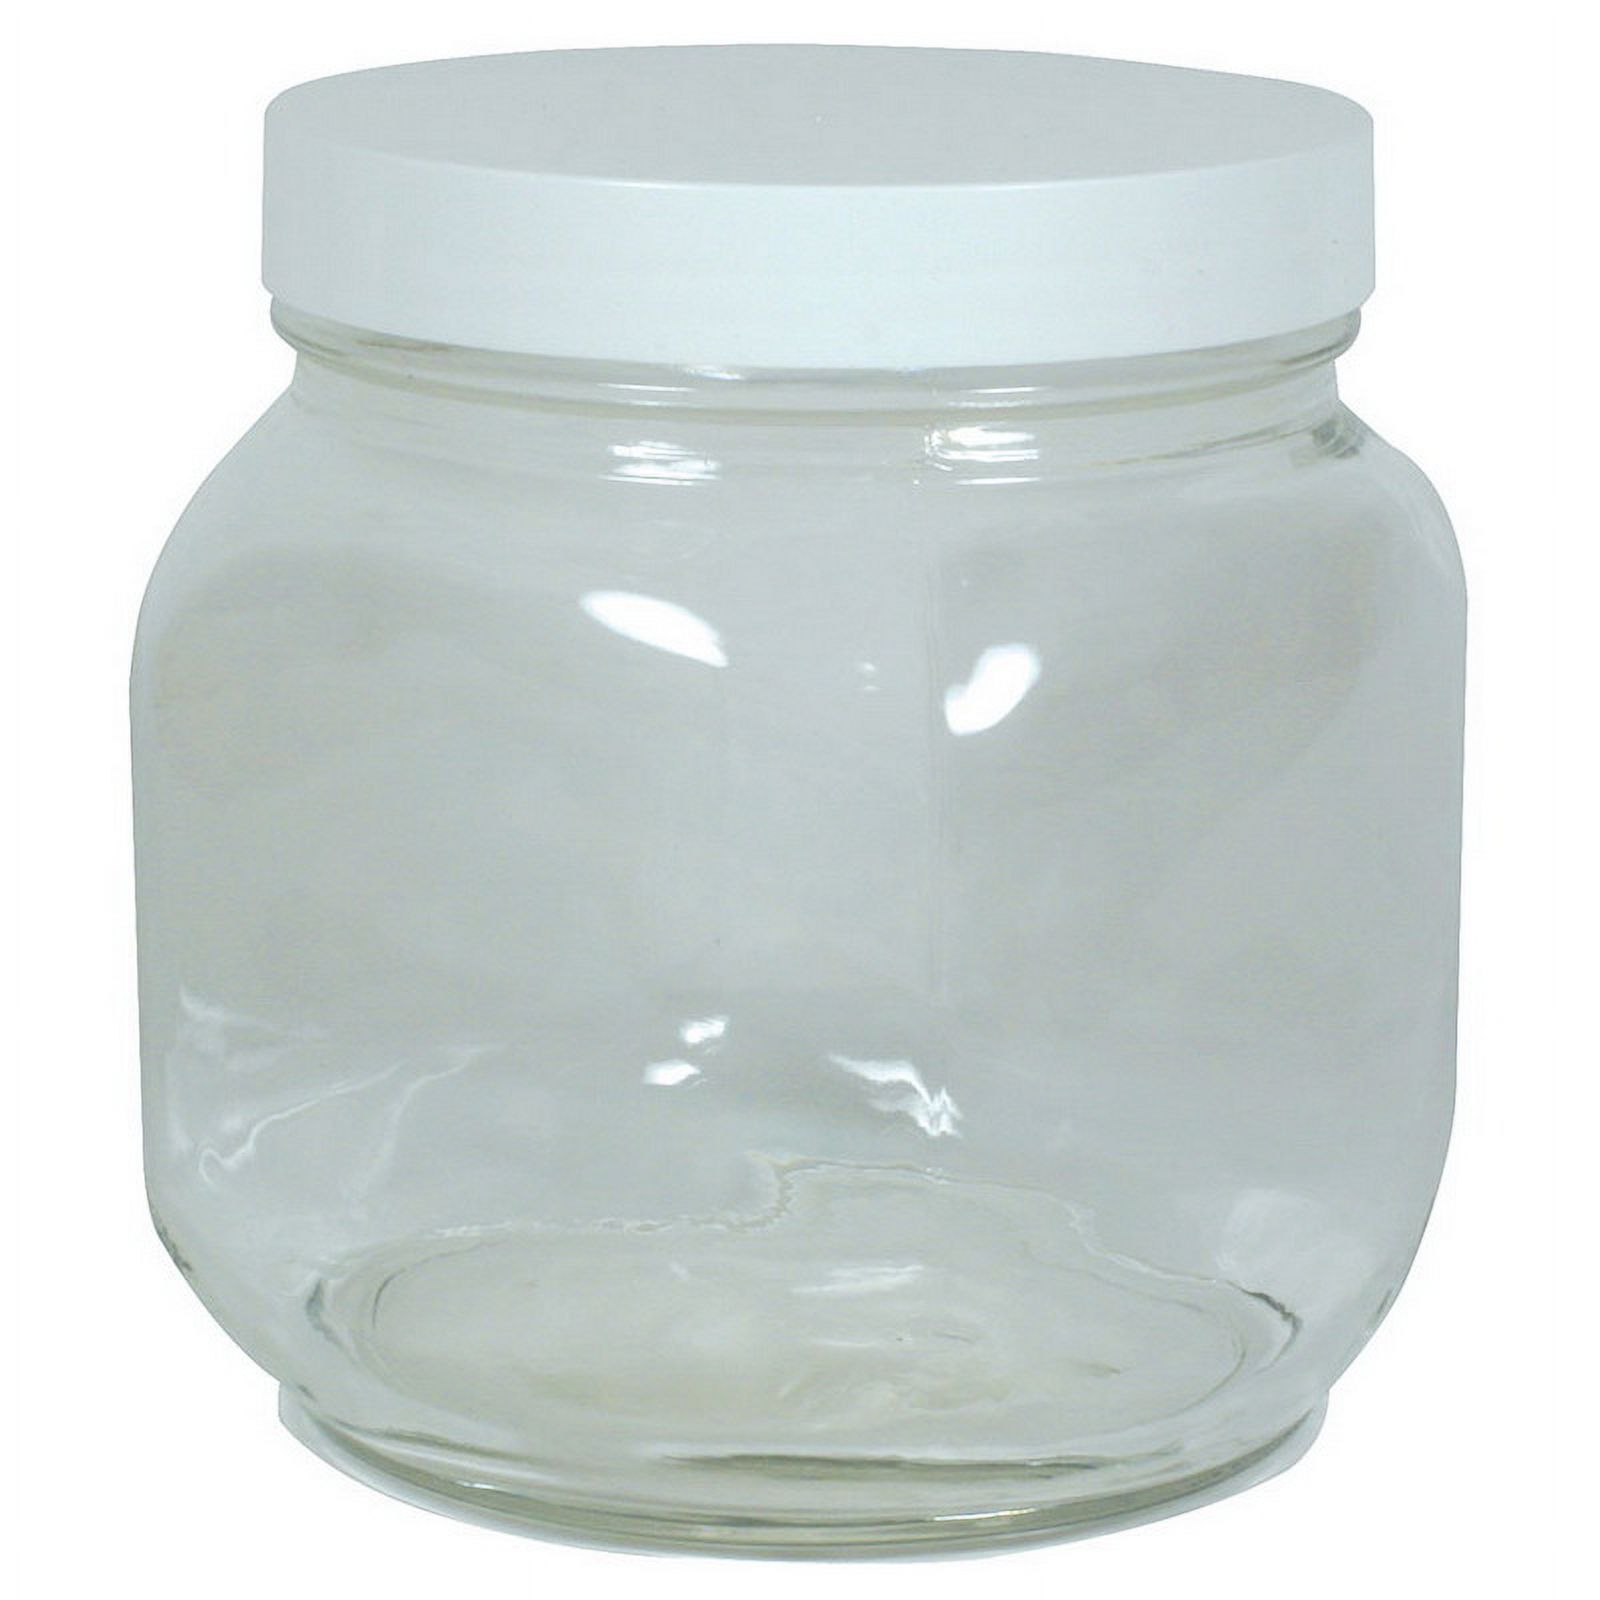 60 oz. Square Wide Mouth Jar with Lid 6 count 8730 - image 1 of 1